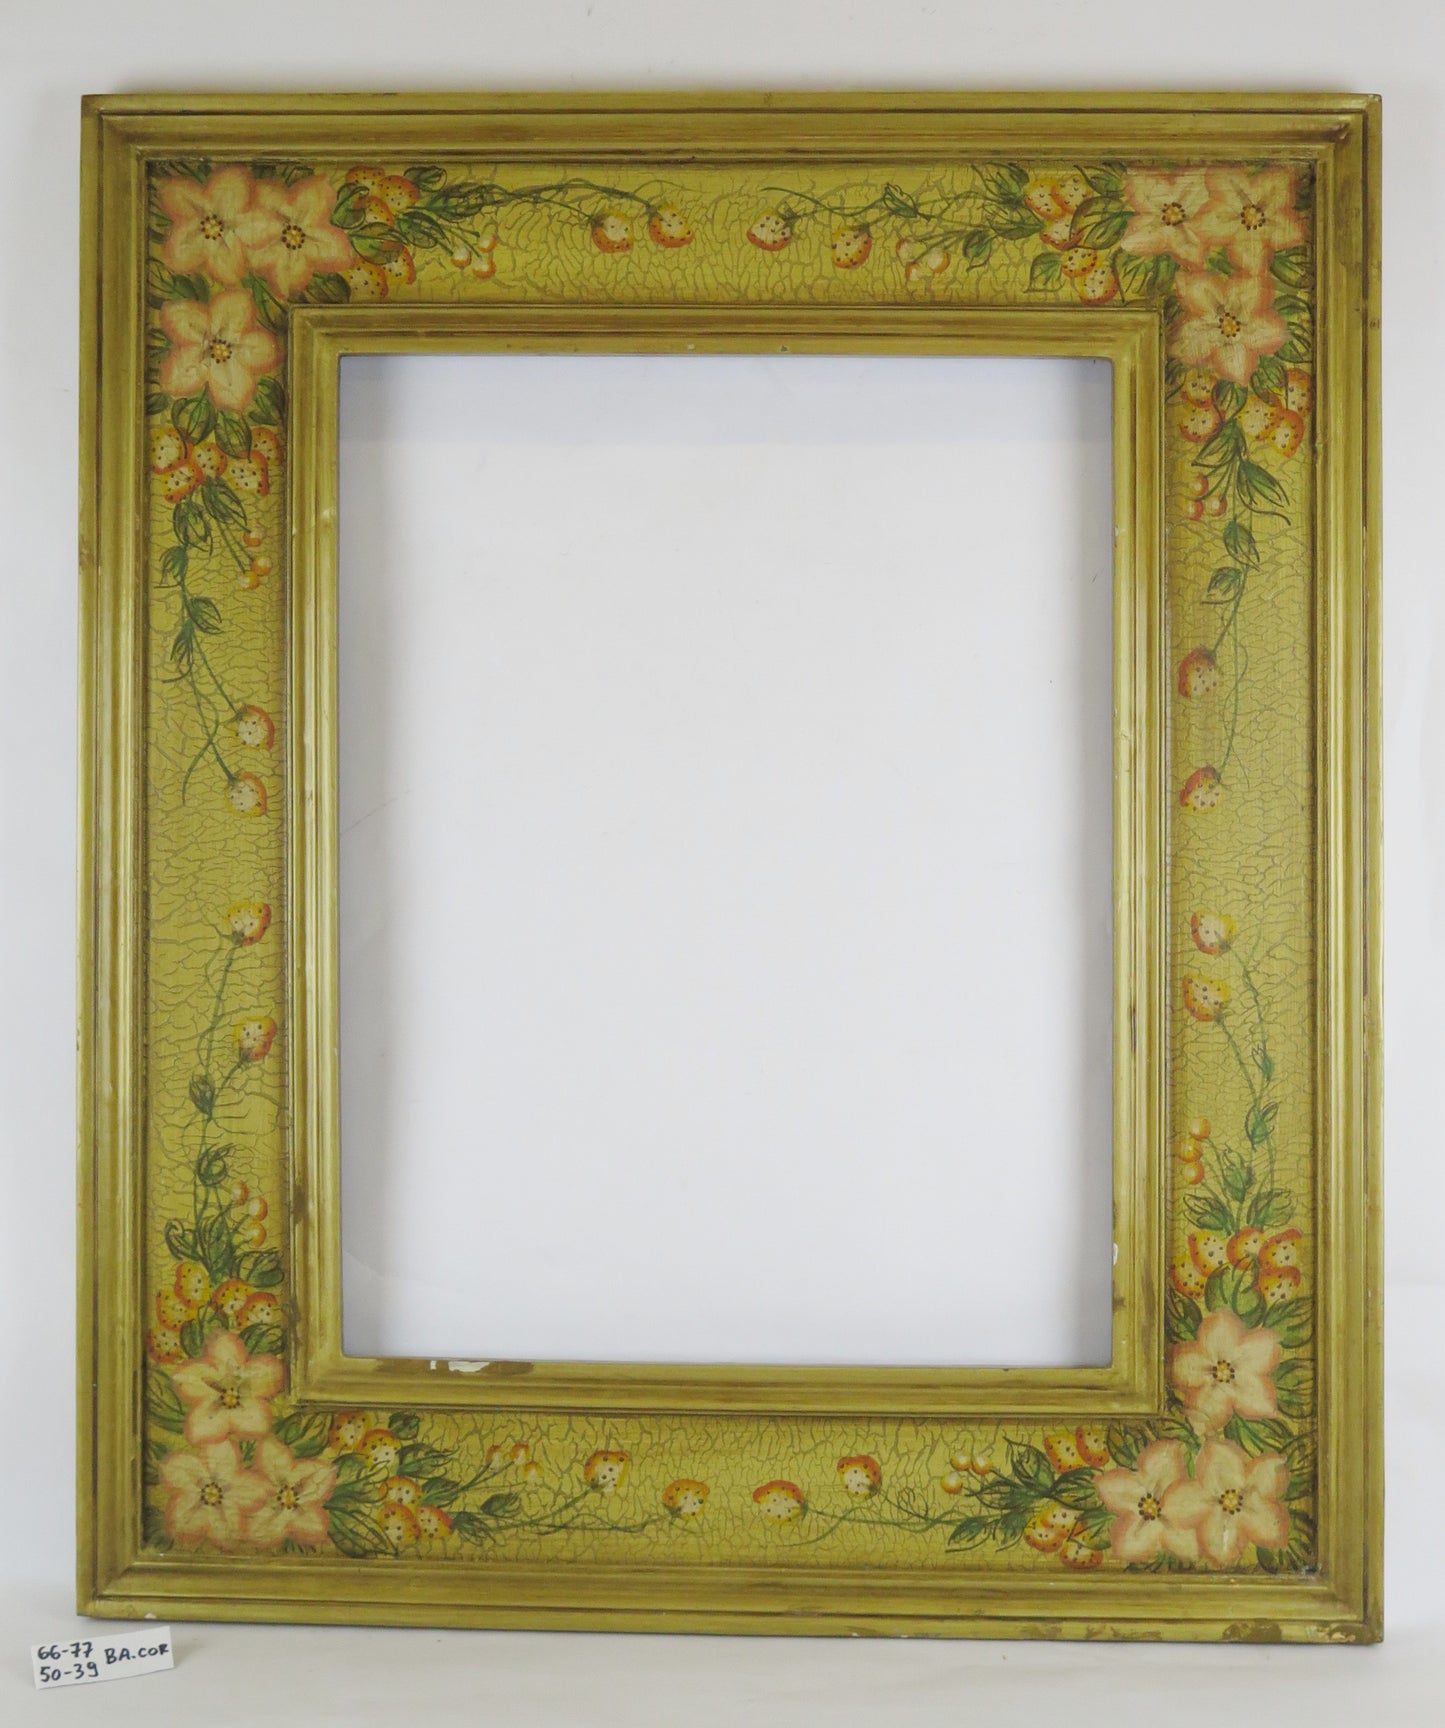 50x39 cm FRAME FOR VINTAGE PAINTINGS IN WOOD PAINTED WITH VEGETABLE PATTERNS BA.COR